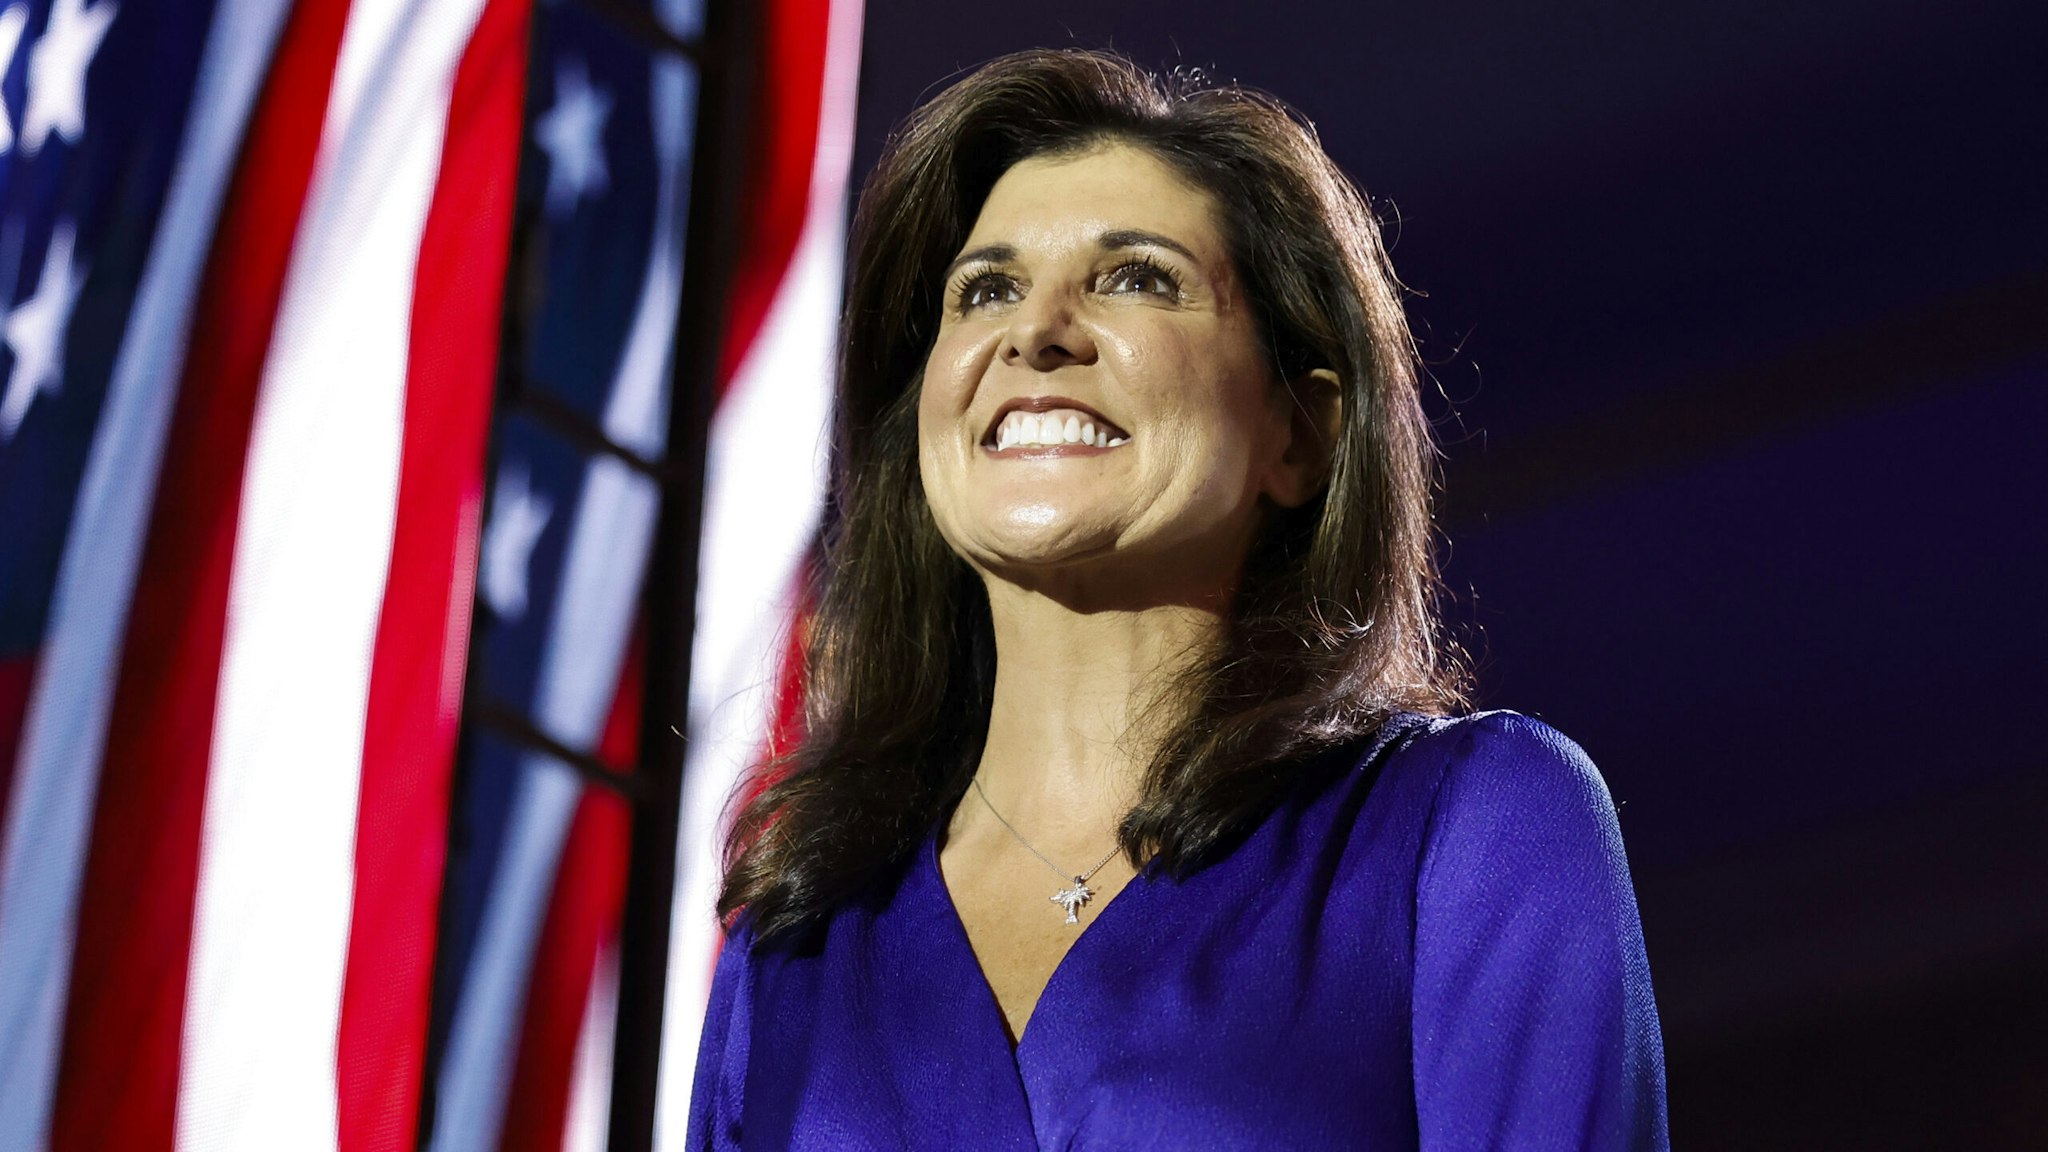 ARLINGTON, VIRGINIA - JULY 17: Republican presidential candidate Nikki Haley arrives to deliver remarks at the Christians United for Israel (CUFI) summit on July 17, 2023 in Arlington, Virginia. The former U.N. ambassador and other 2024 GOP hopefuls are making their cases before the pro-Israeli group.